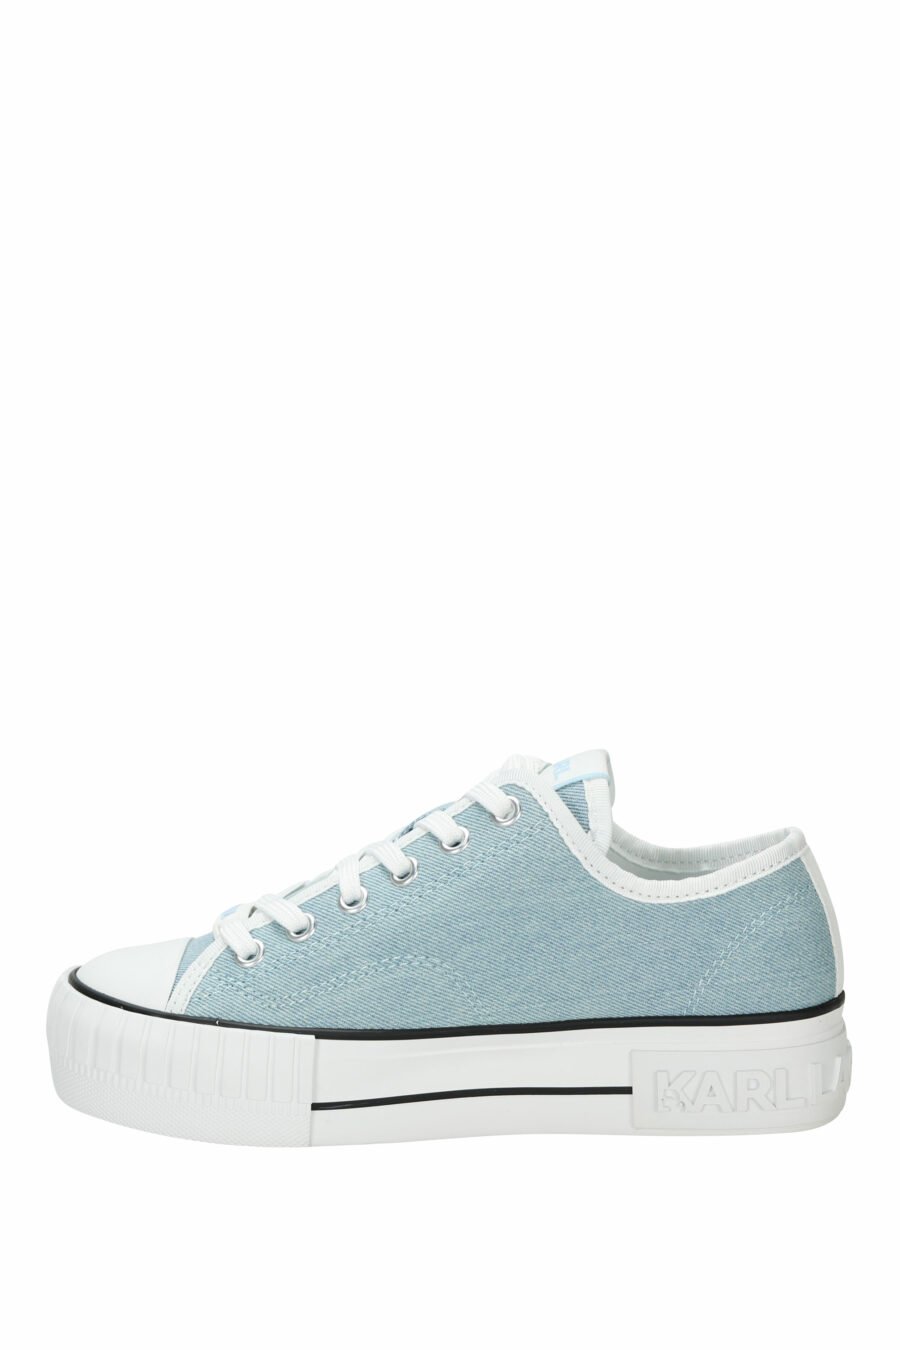 Light blue "converse" style trainers with "karl" rubber mini-logo - 5059529384691 2